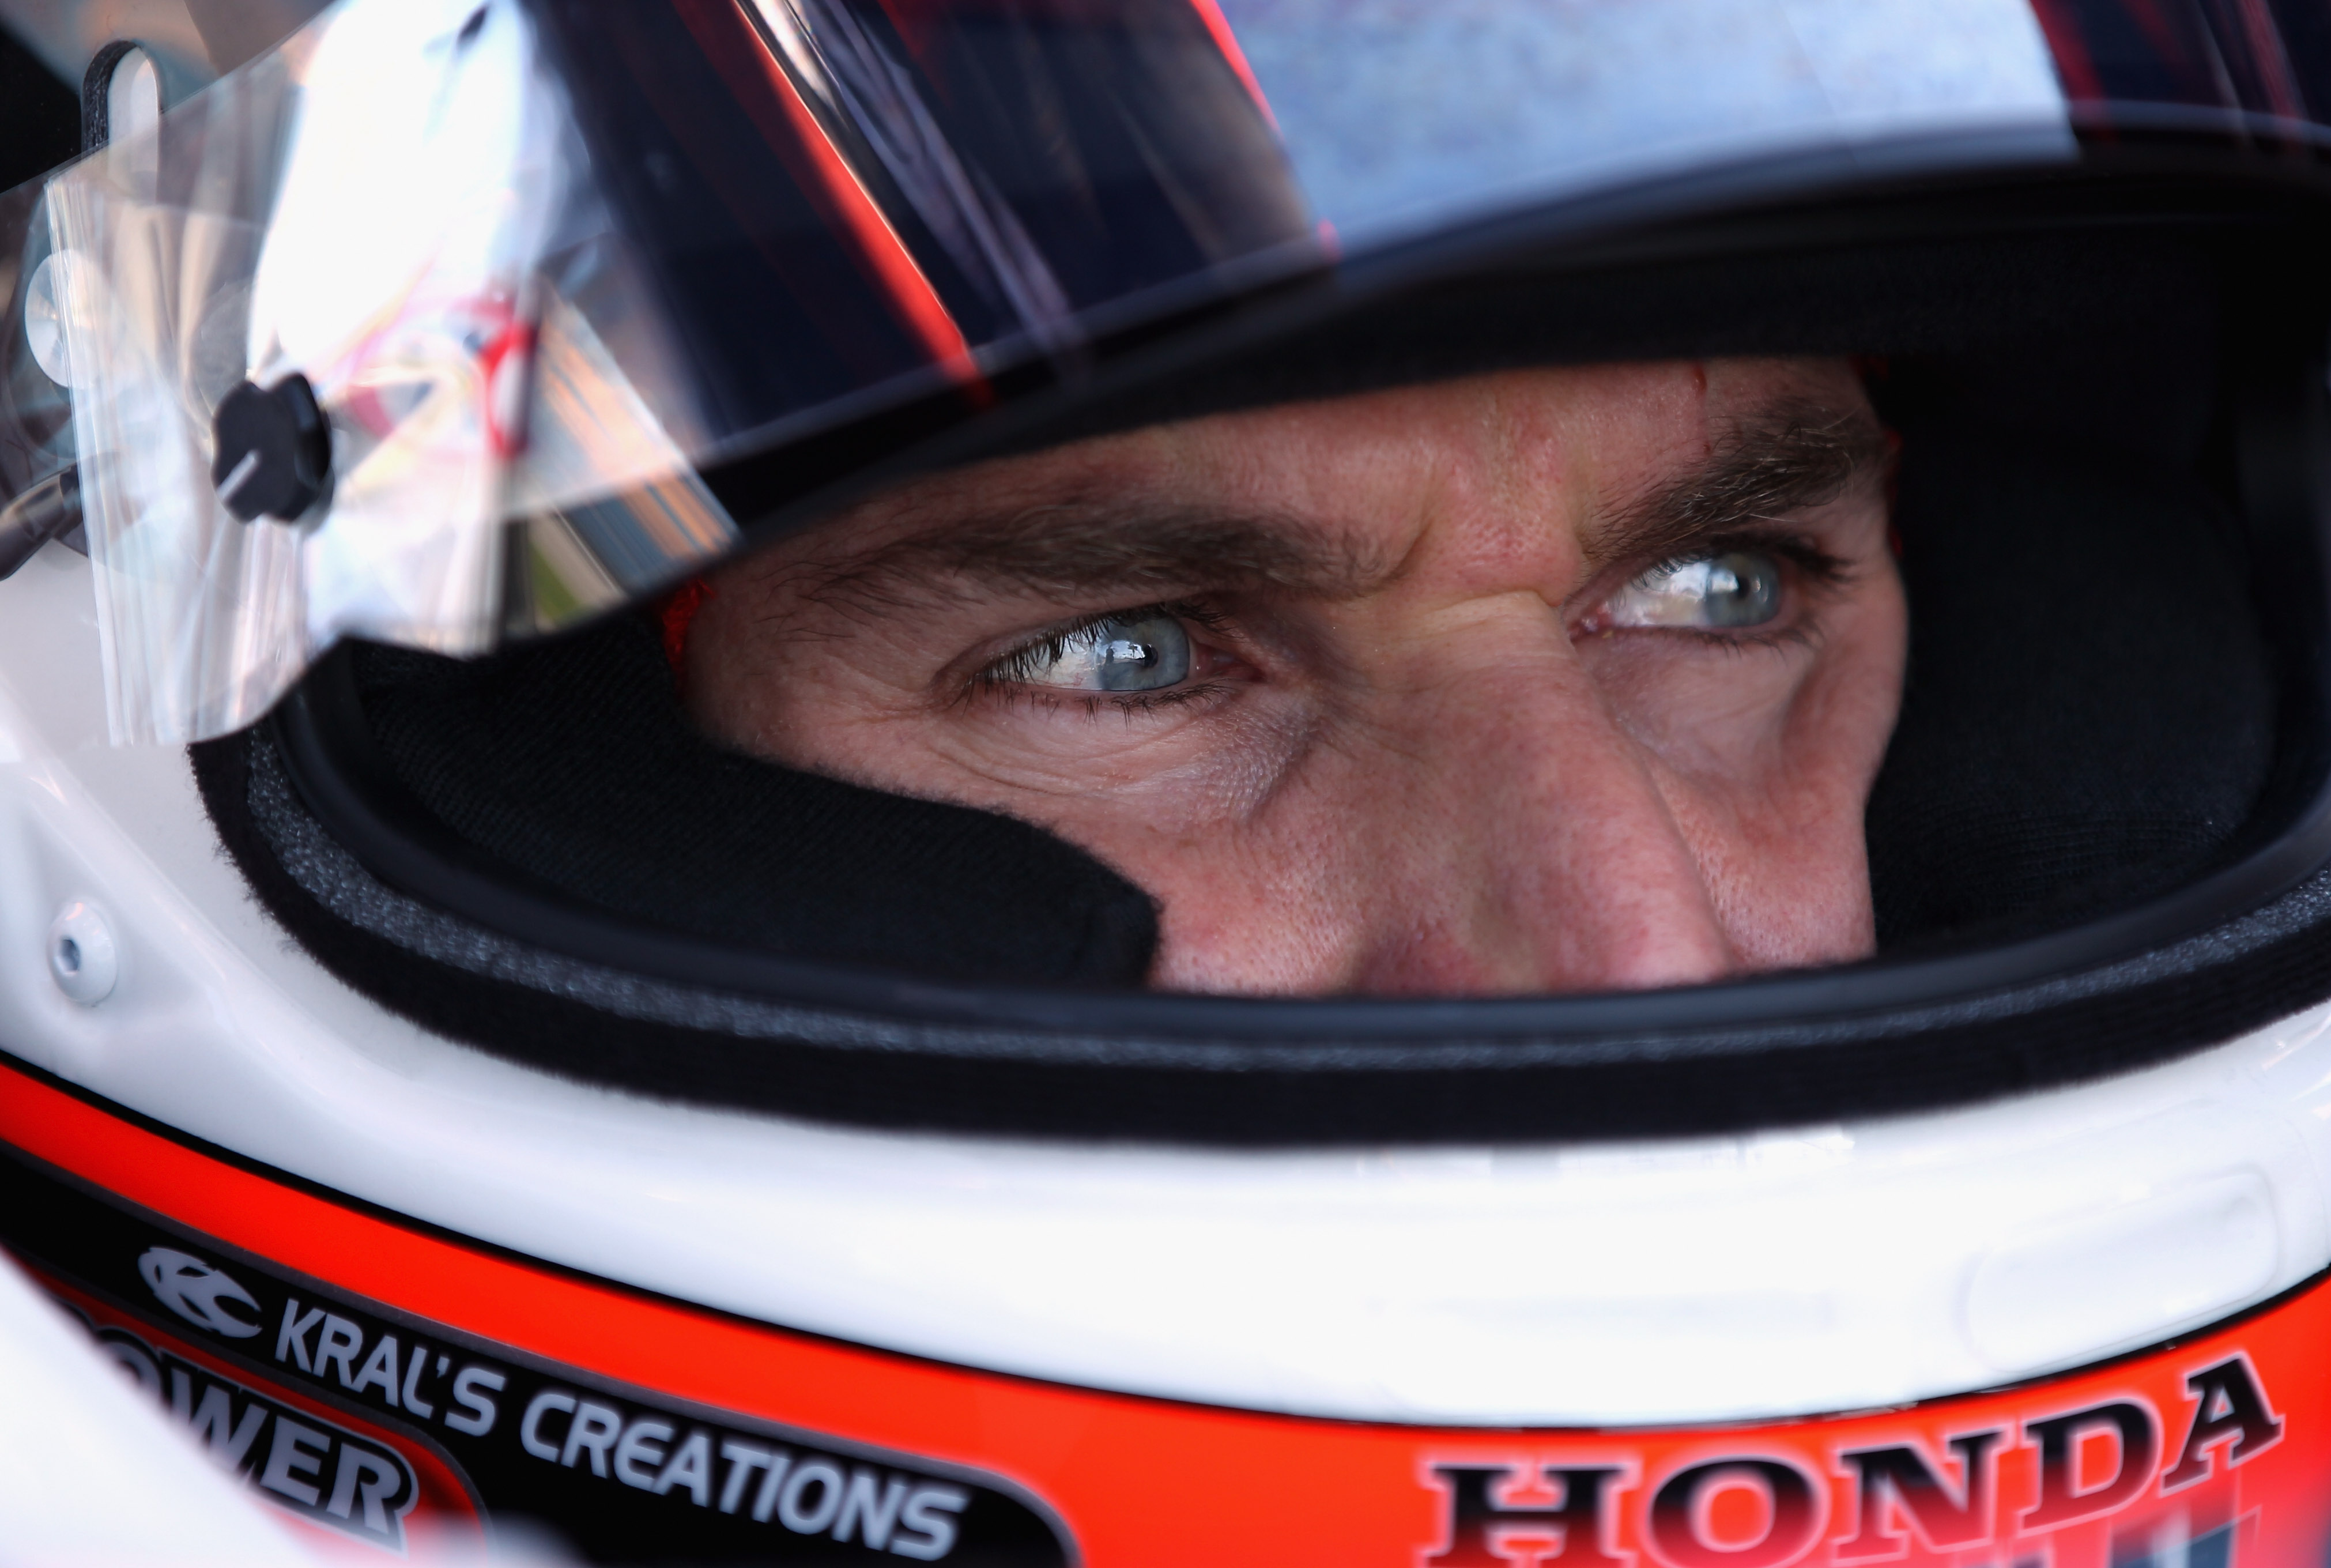 CHICAGO - AUGUST 27:  Will Power of Australia, driver of the #12 Verizon Penske Racing Dallara Honda, during practice for the IndyCar Series PEAK Antifreeze and Motor Oil Indy 300 at Chicagoland Speedway on August 27, 2010 in Chicago, Illinois.  (Photo by